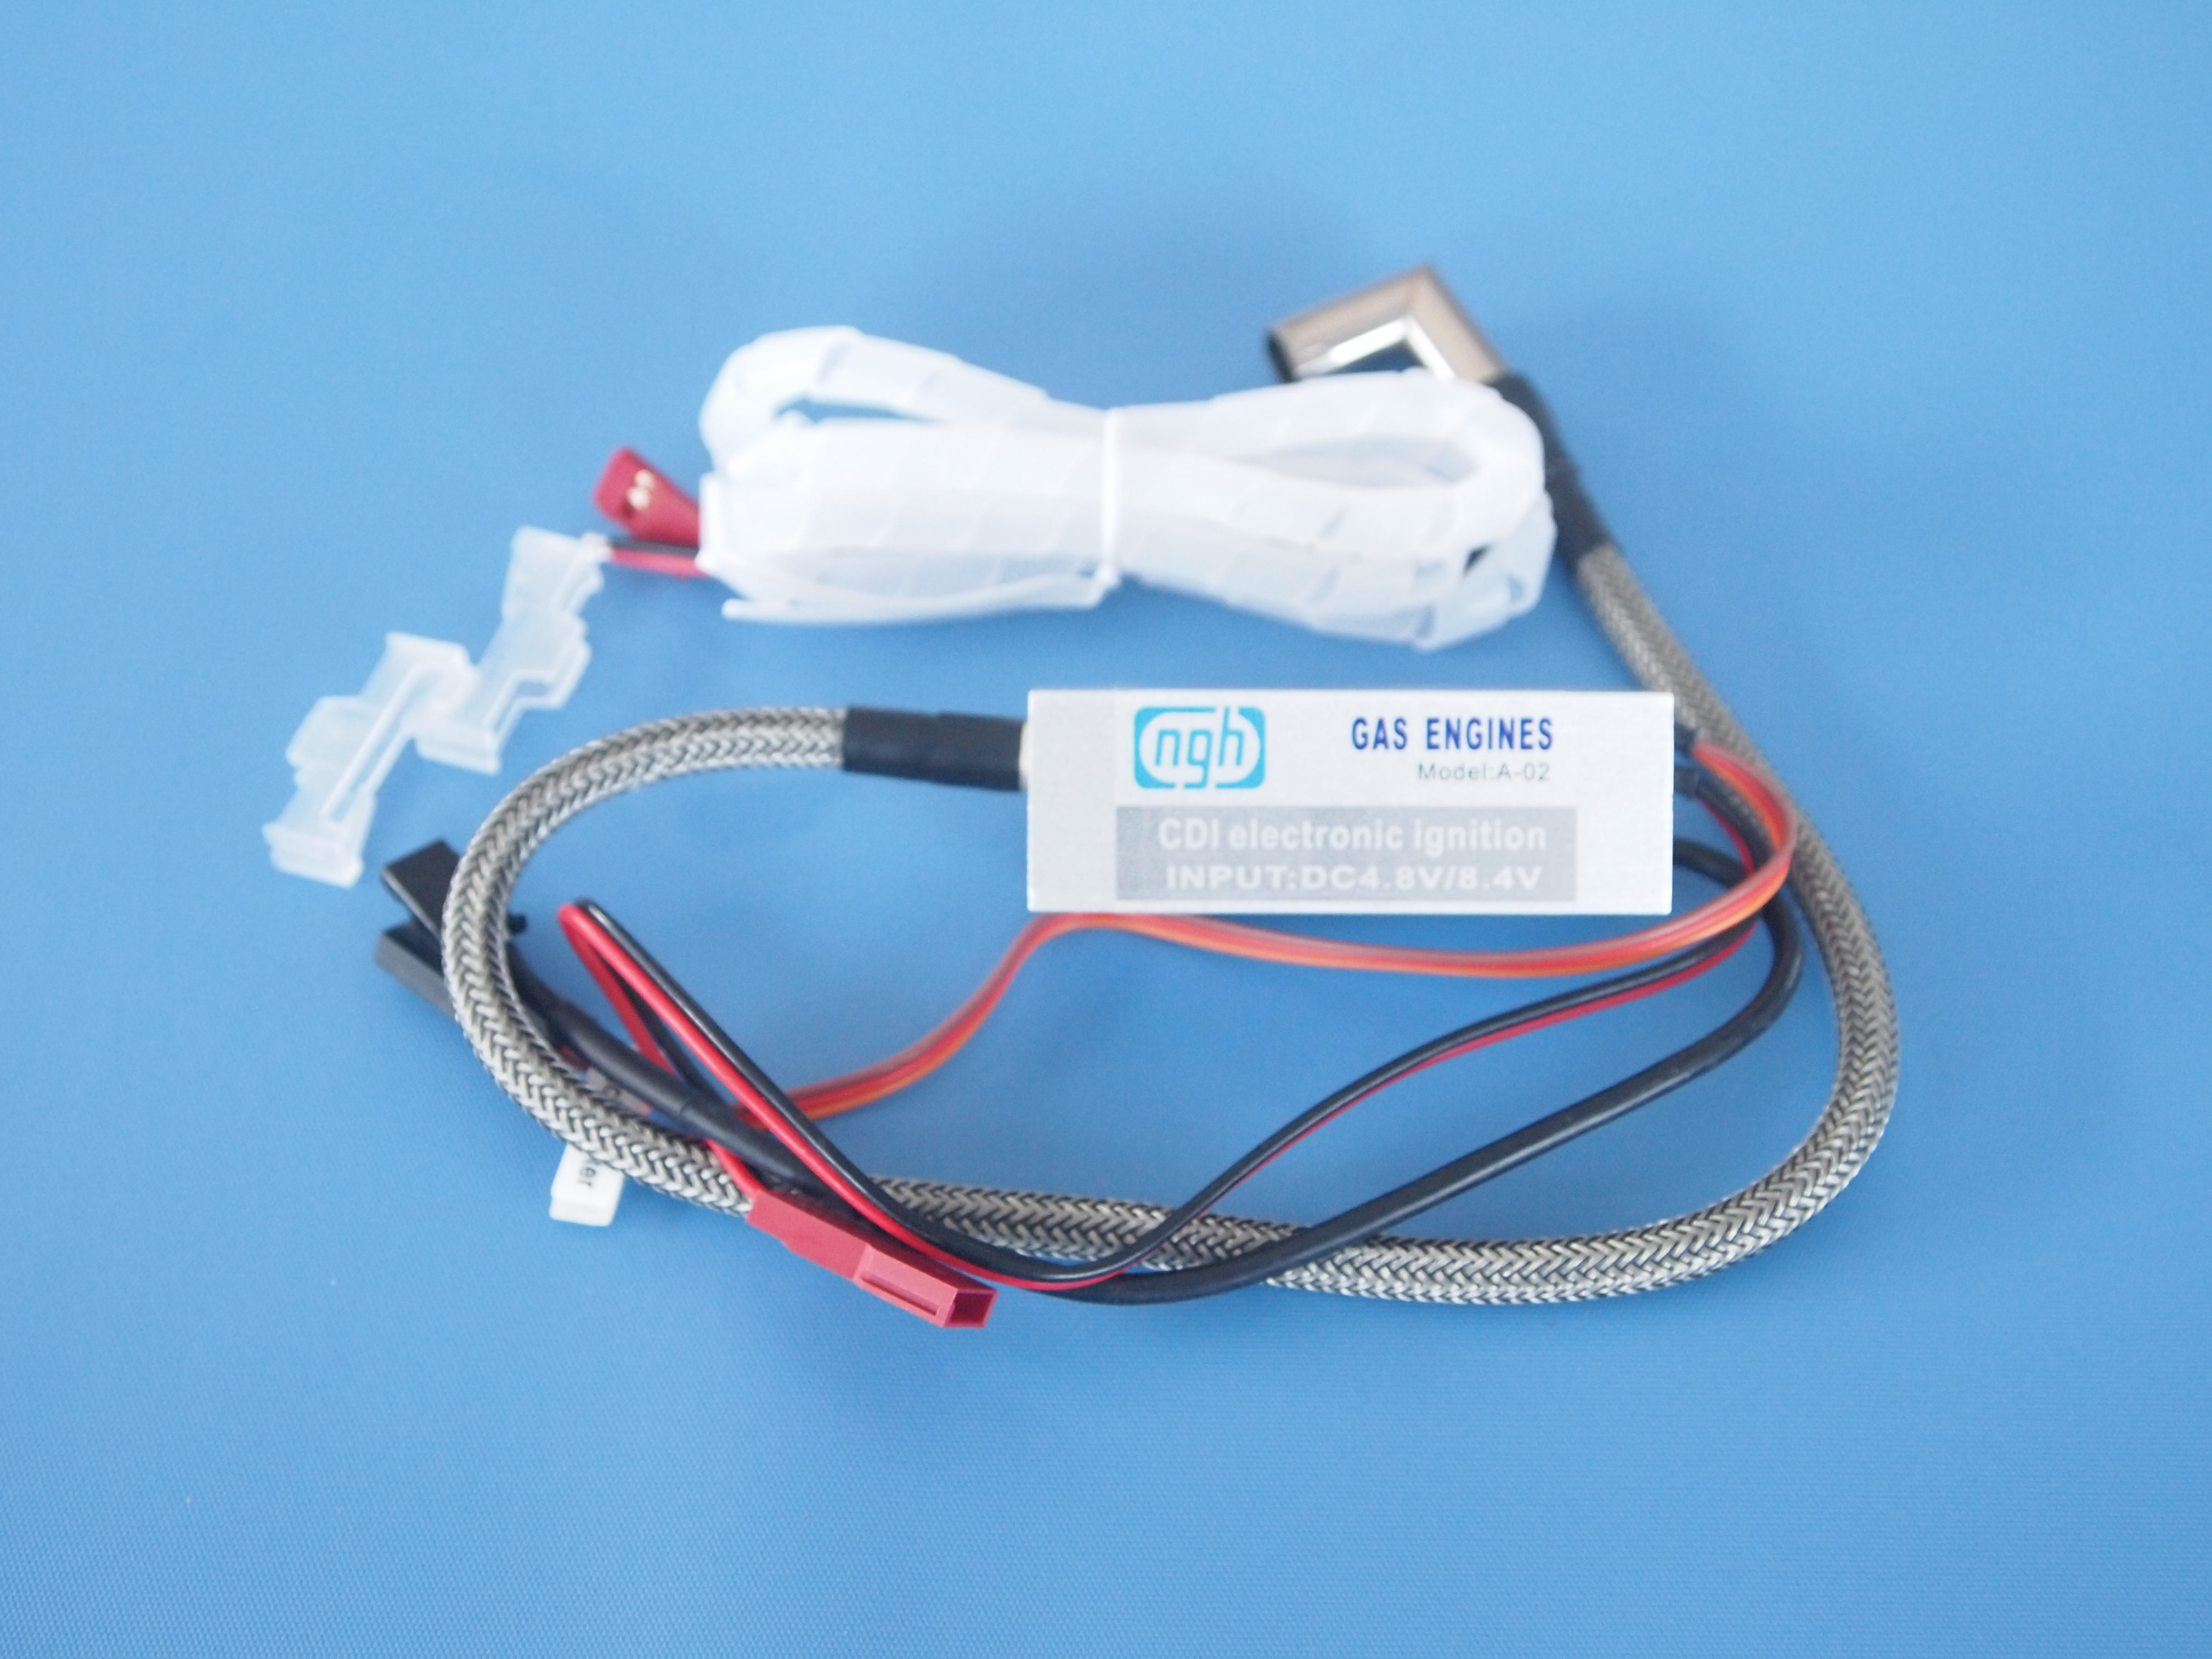 9202 CDI electronic igniter for NGH GT9/GT17/GT25 gas engine